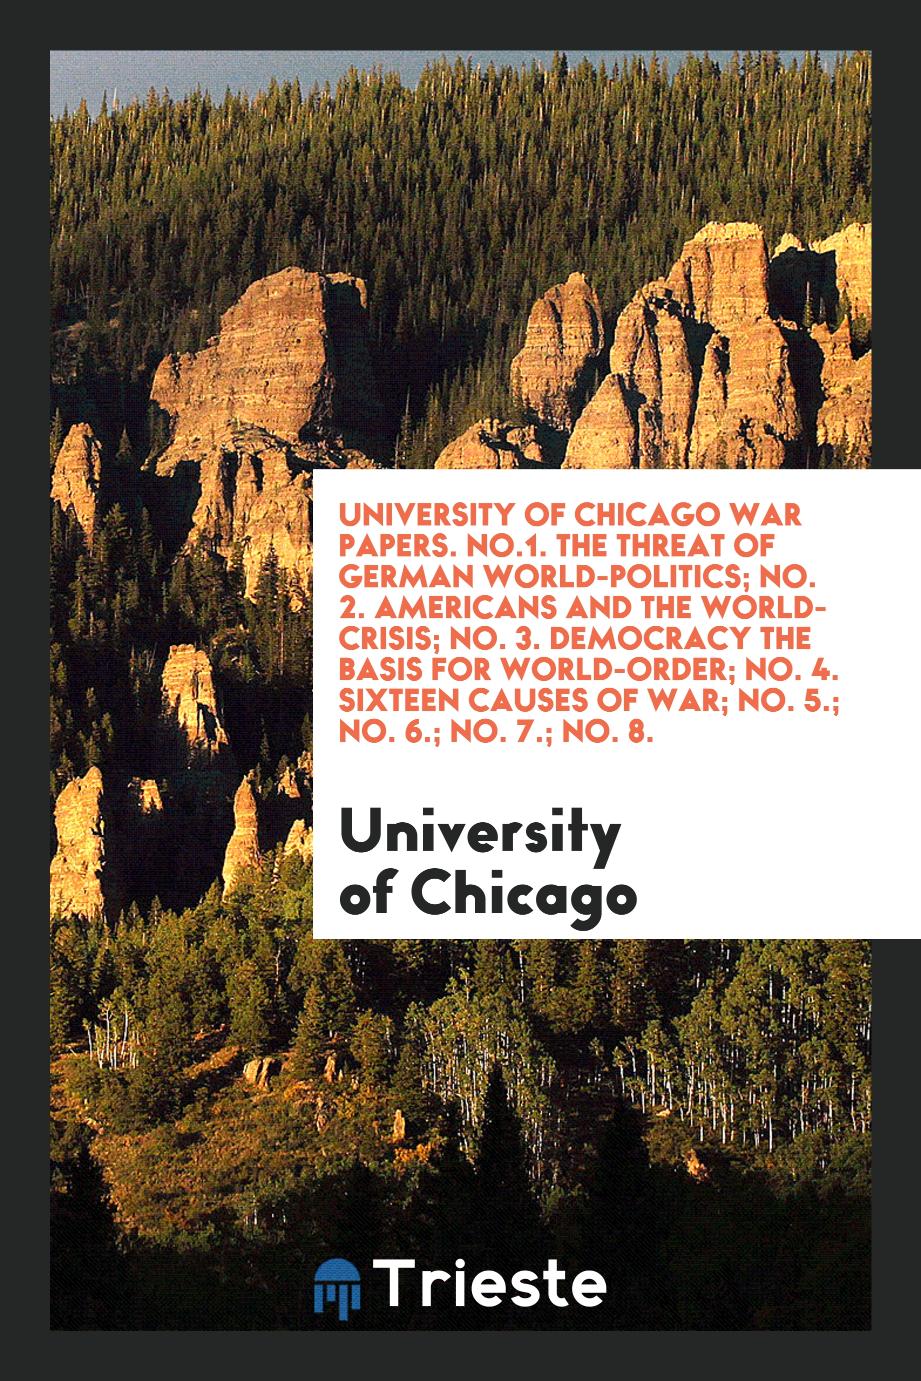 University of Chicago War Papers. No.1. The Threat of German World-Politics; No. 2. Americans and the World-Crisis; No. 3. Democracy the Basis for World-Order; No. 4. Sixteen Causes of War; No. 5.; No. 6.; No. 7.; No. 8.